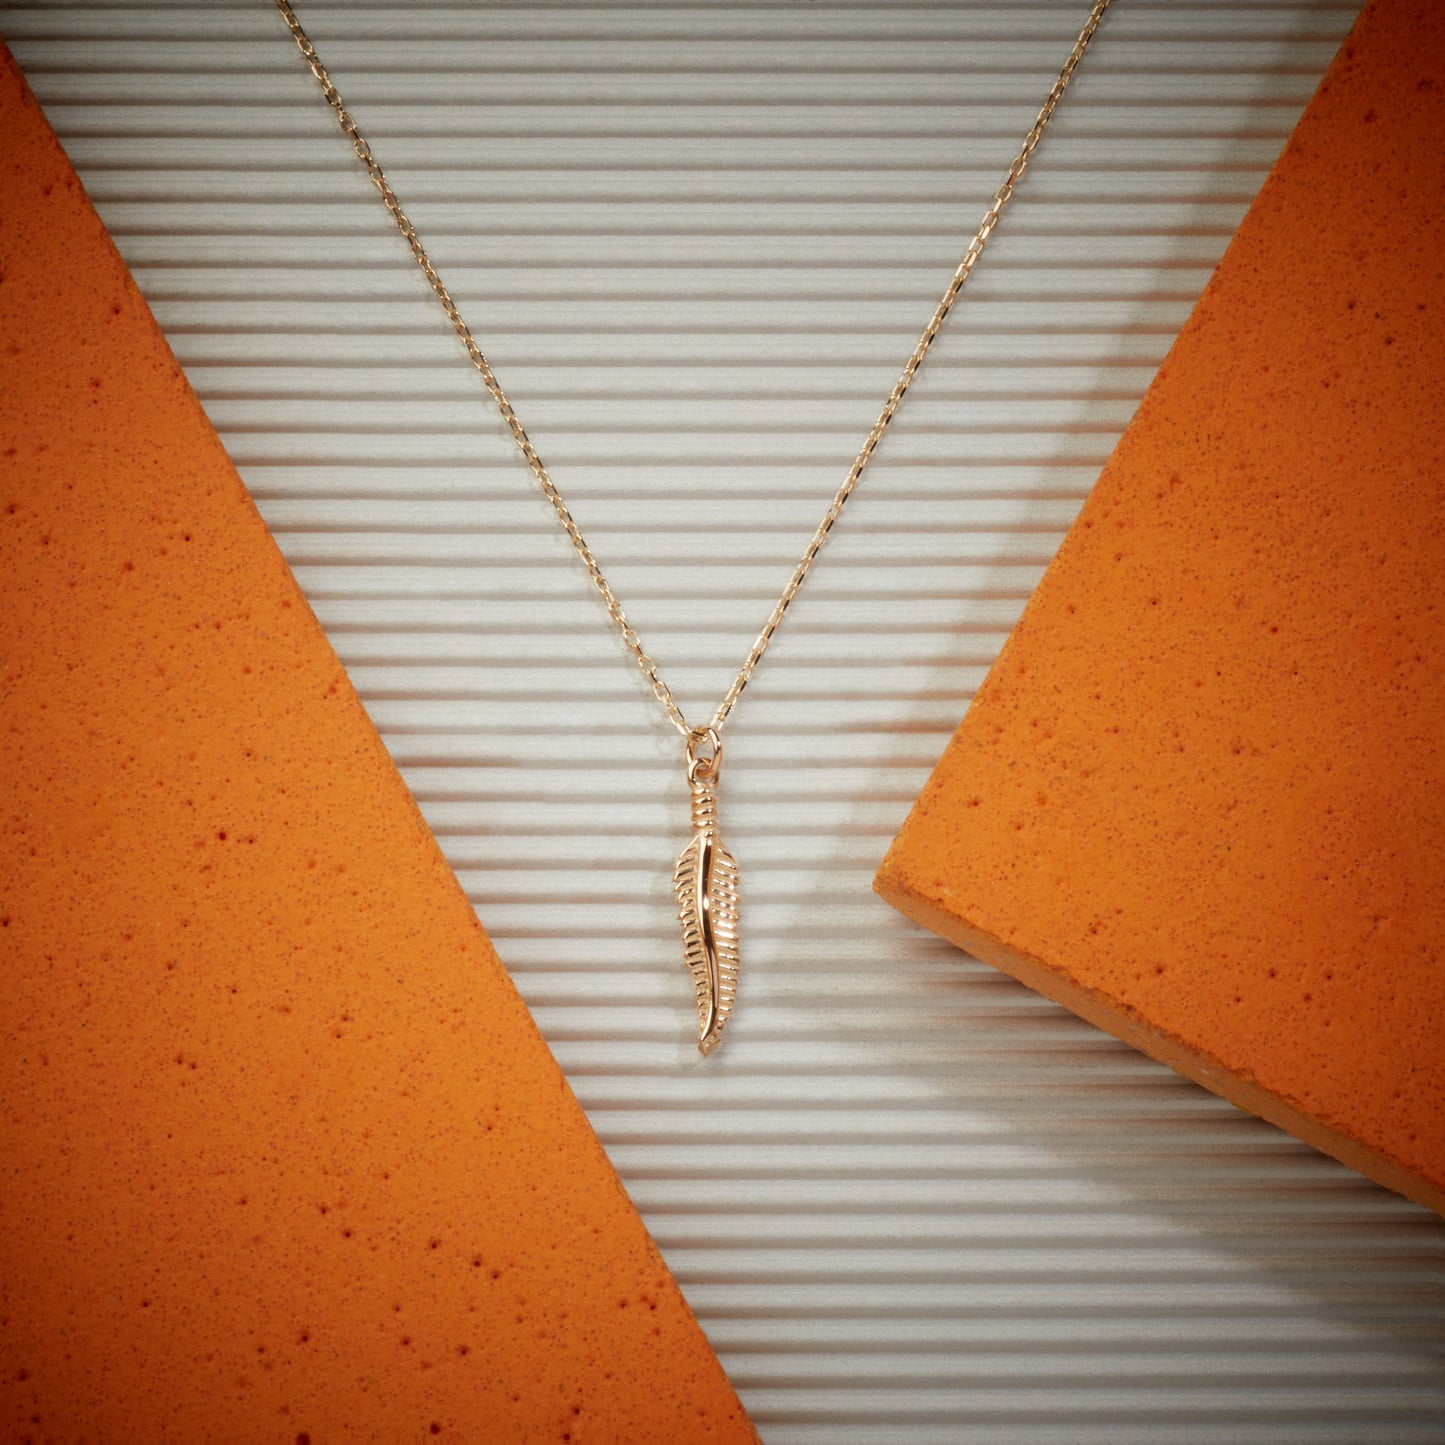 14k gold necklace, dainty gold necklace, gold necklace women, solid gold pendant, solid gold necklace, real gold necklace, yellow rose white, gold leaf necklace, lucky feather charm, gold feather charm, minimalist necklace, gold flower necklace, solid gold leaf, 